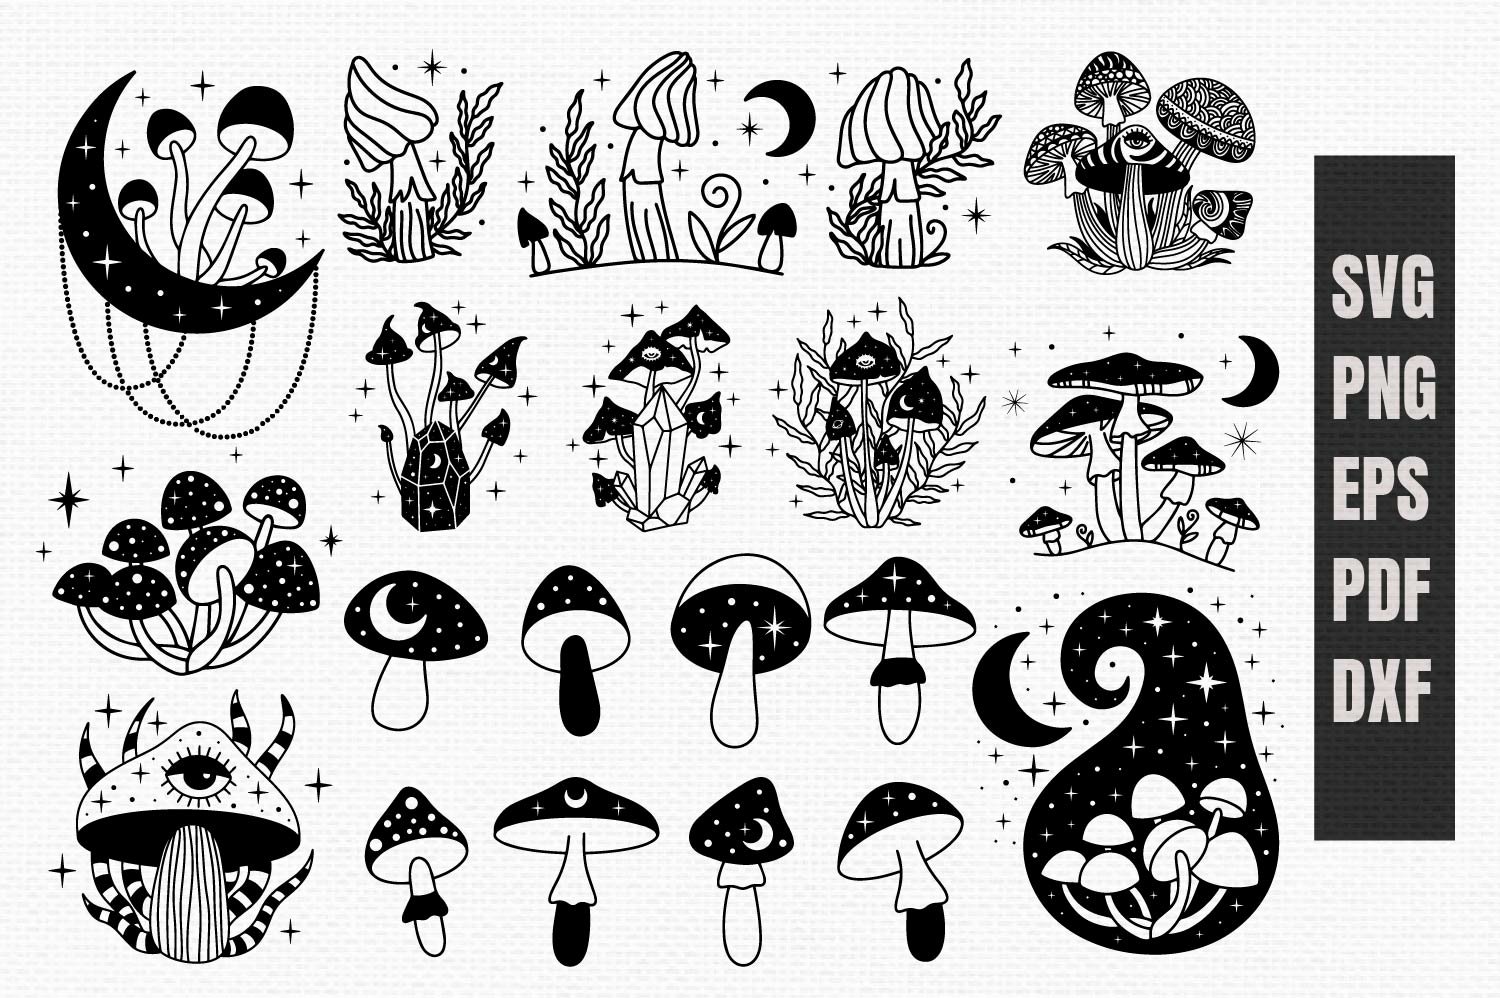 Diverse of elements for creating illustration with magic mushroom.